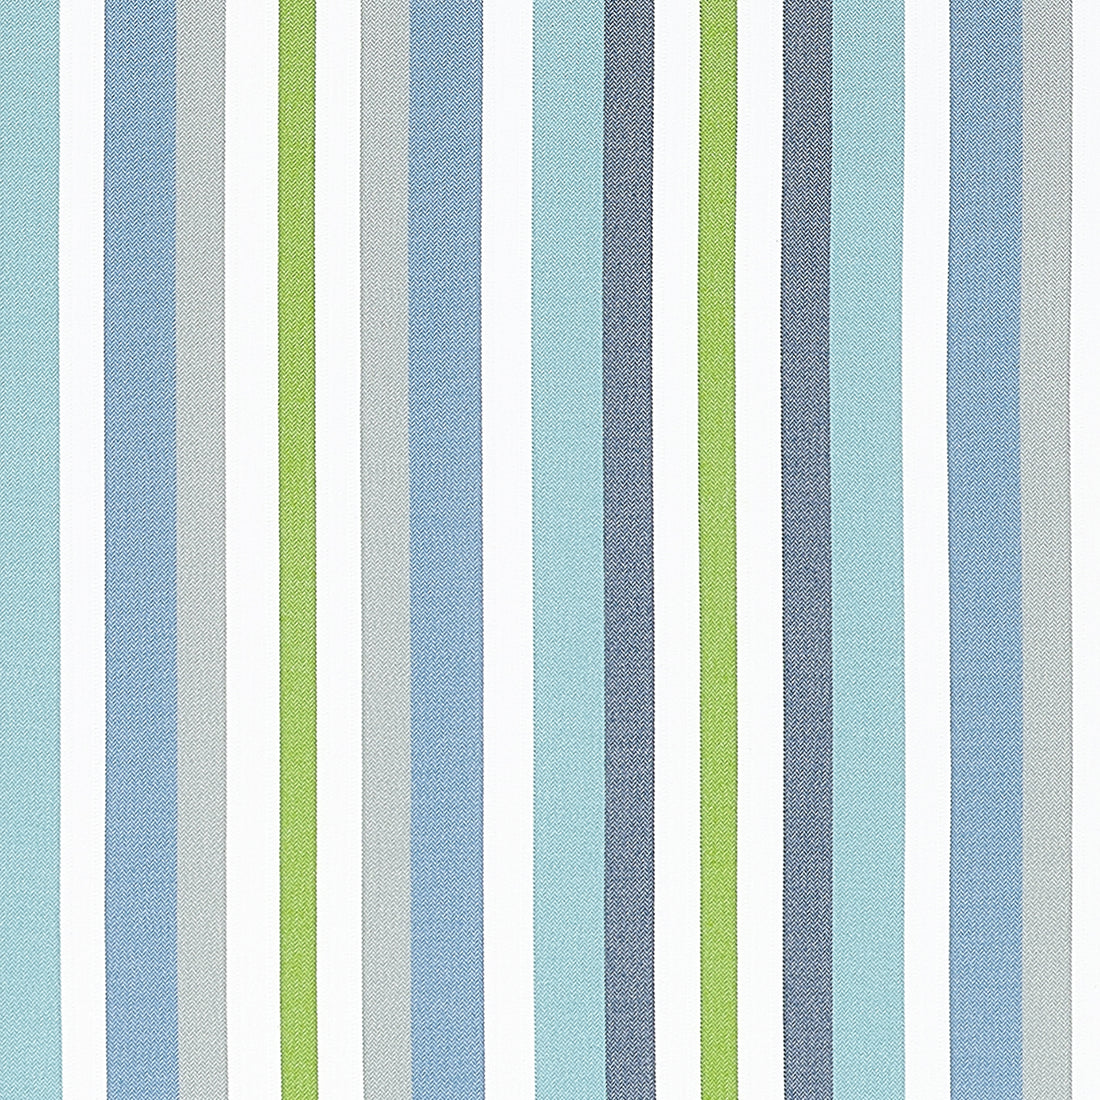 Kalea Stripe fabric in coastal color - pattern number W81668 - by Thibaut in the Locale collection